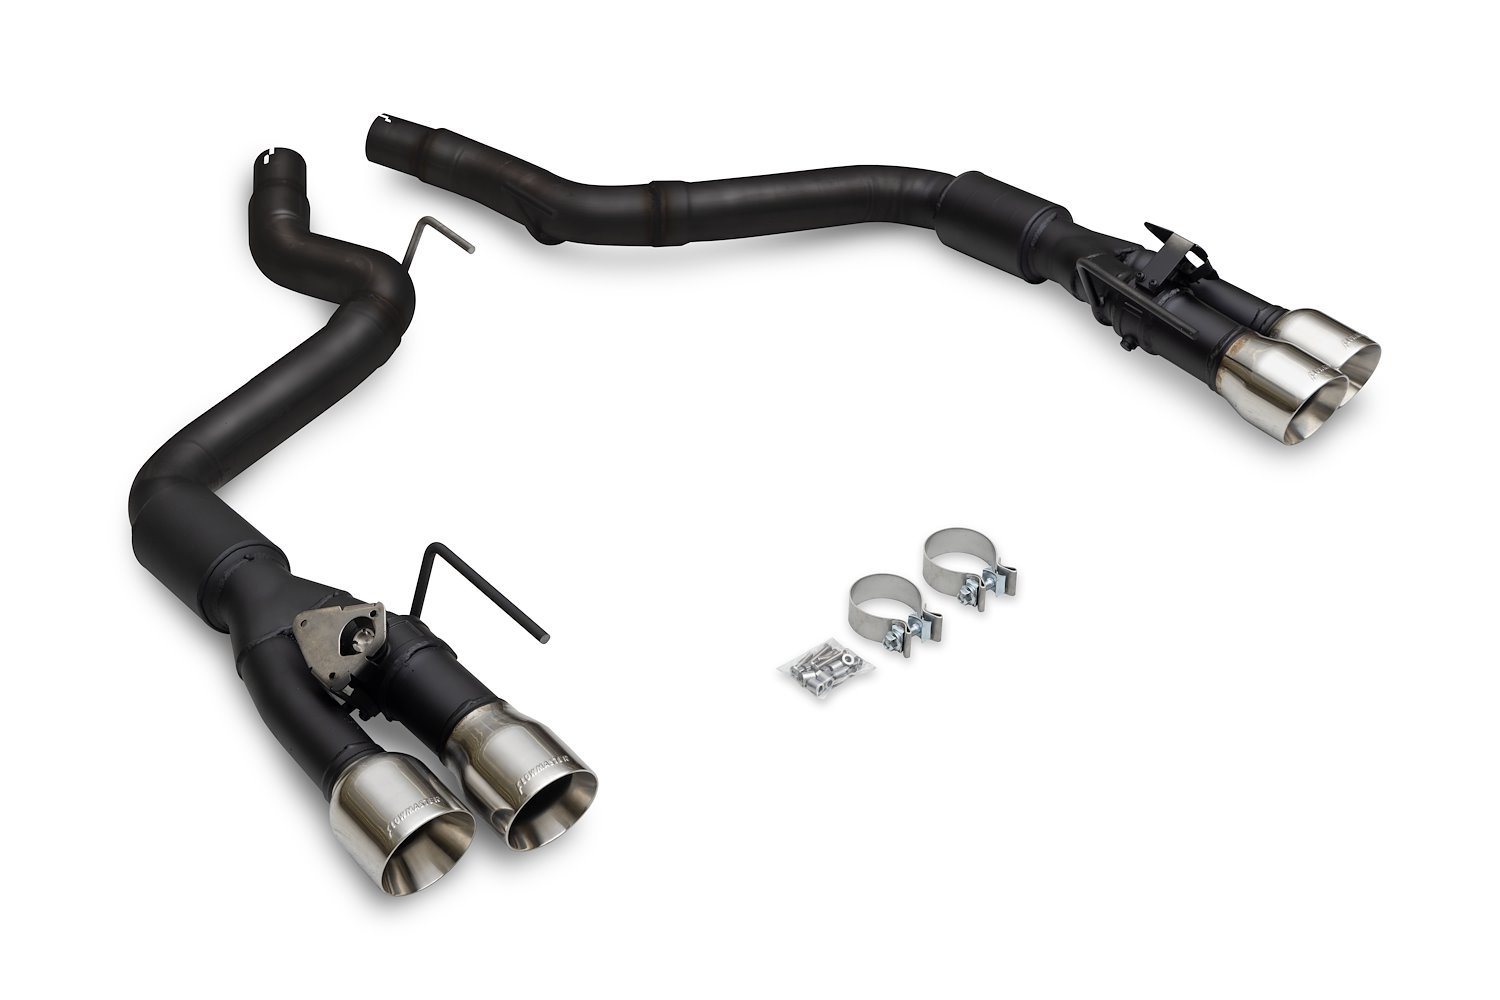 818164 Outlaw Axle-Back Exhaust System Fits Select Ford Mustang GT 2.3L EcoBoost/5.0L with Valves [Polished Tips, Quad Exit]